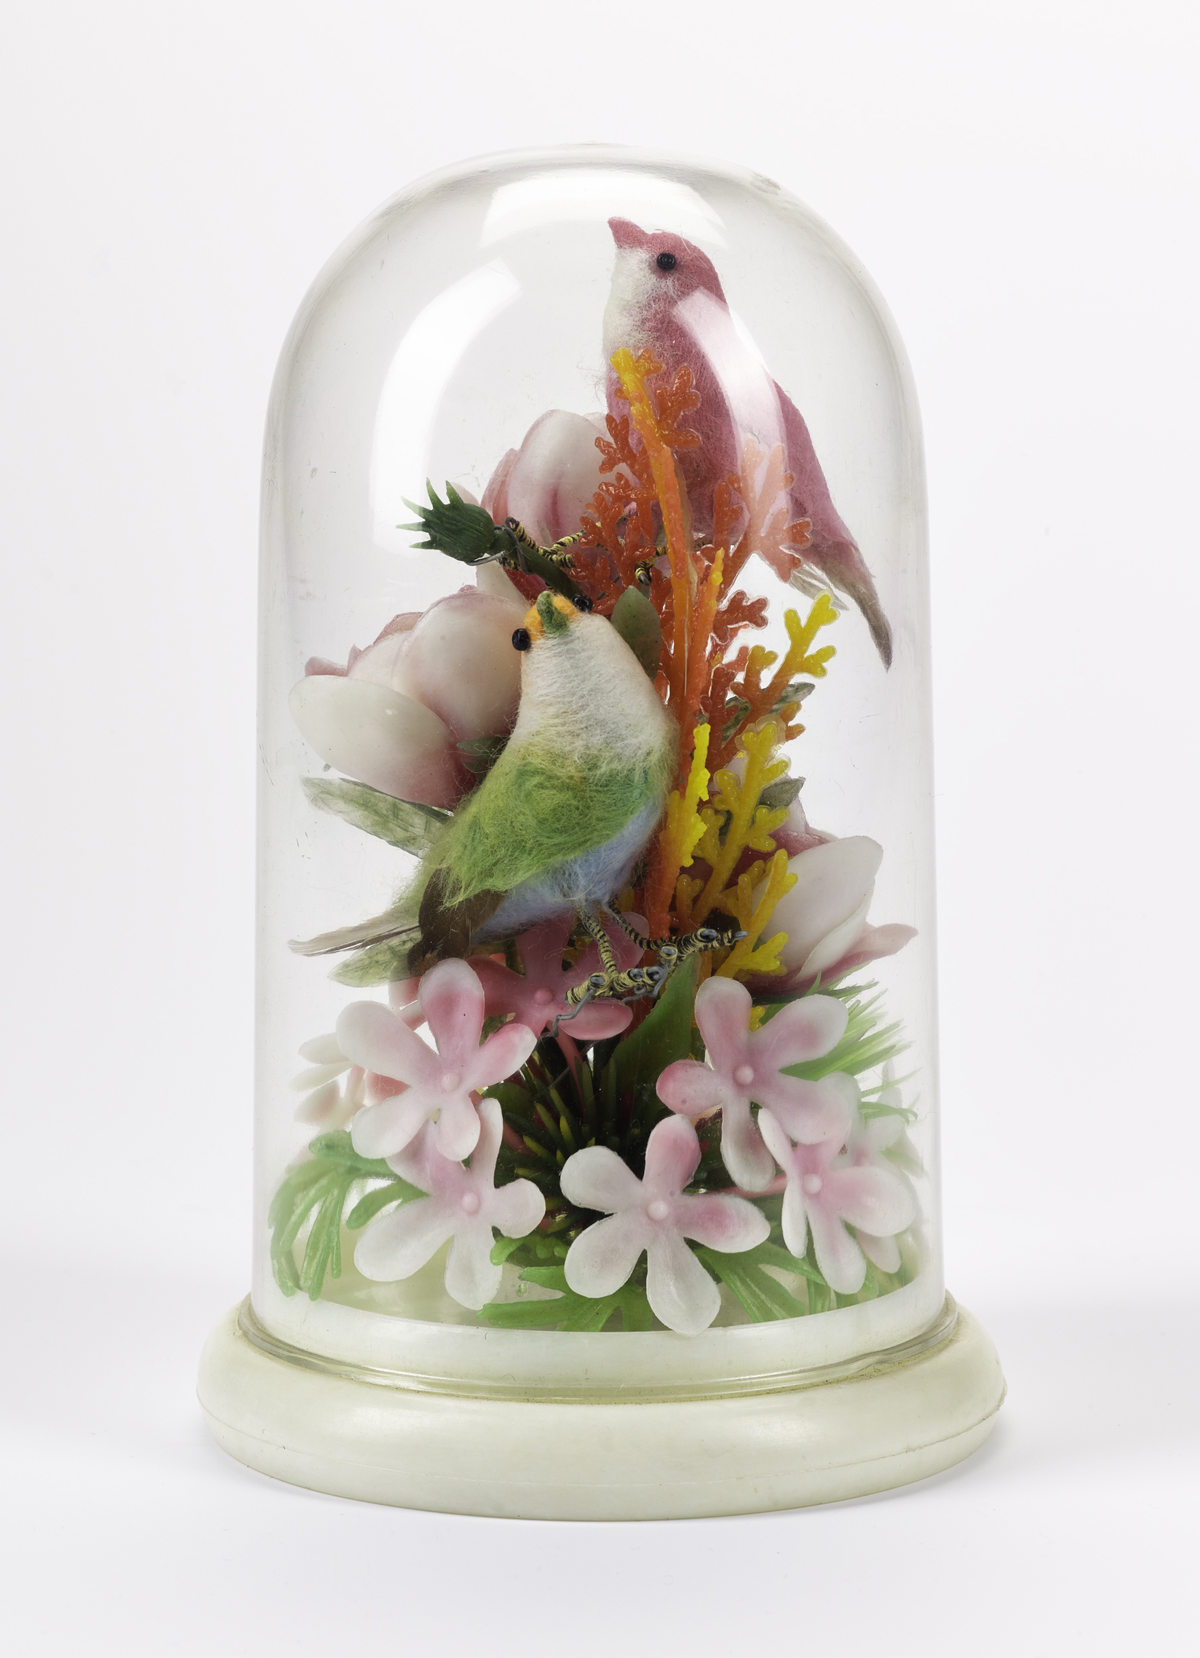 A.1990.1313 - Ornament in form of a plastic dome containing a display of pink plastic flowers and two birds,  one pink and one green, made in Hong Kong.